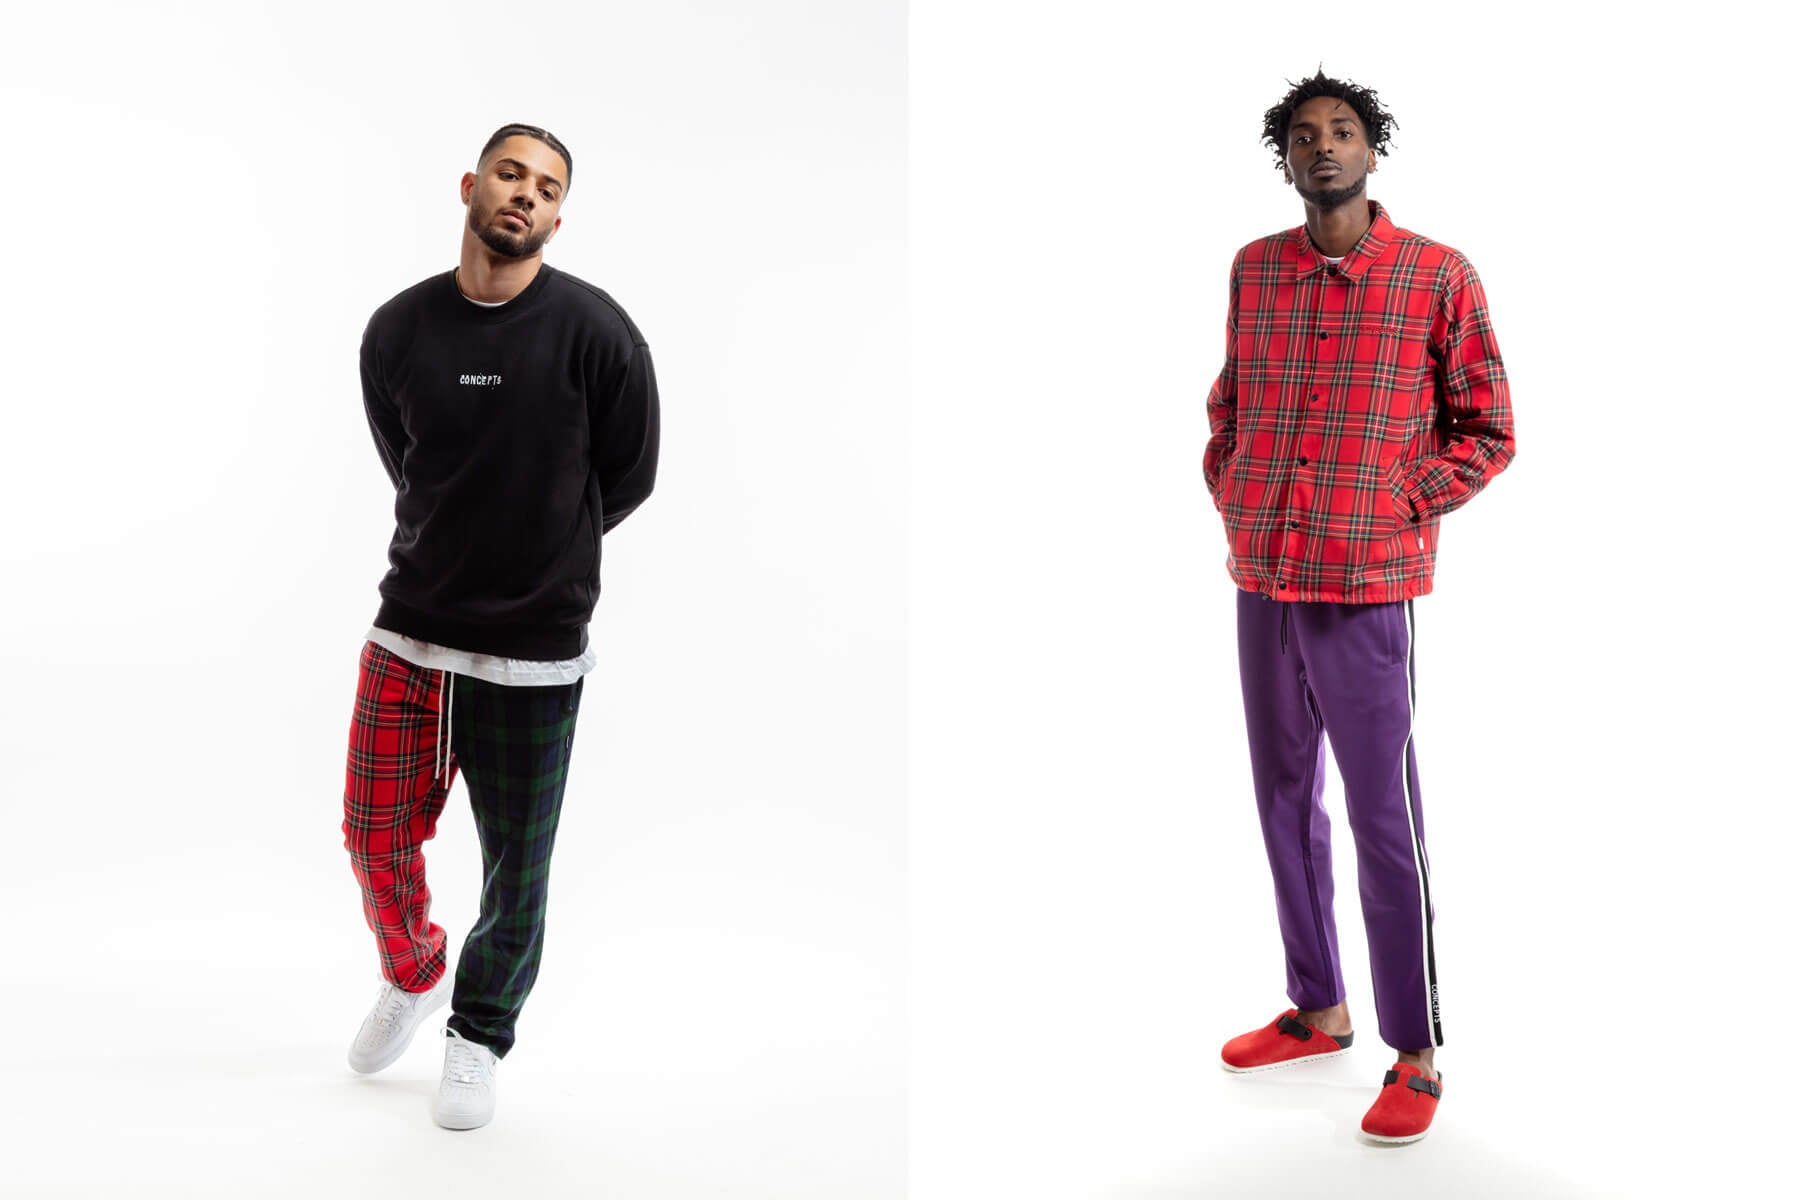 CONCEPTS FALL/WINTER 2019 COLLECTION - DROP 4